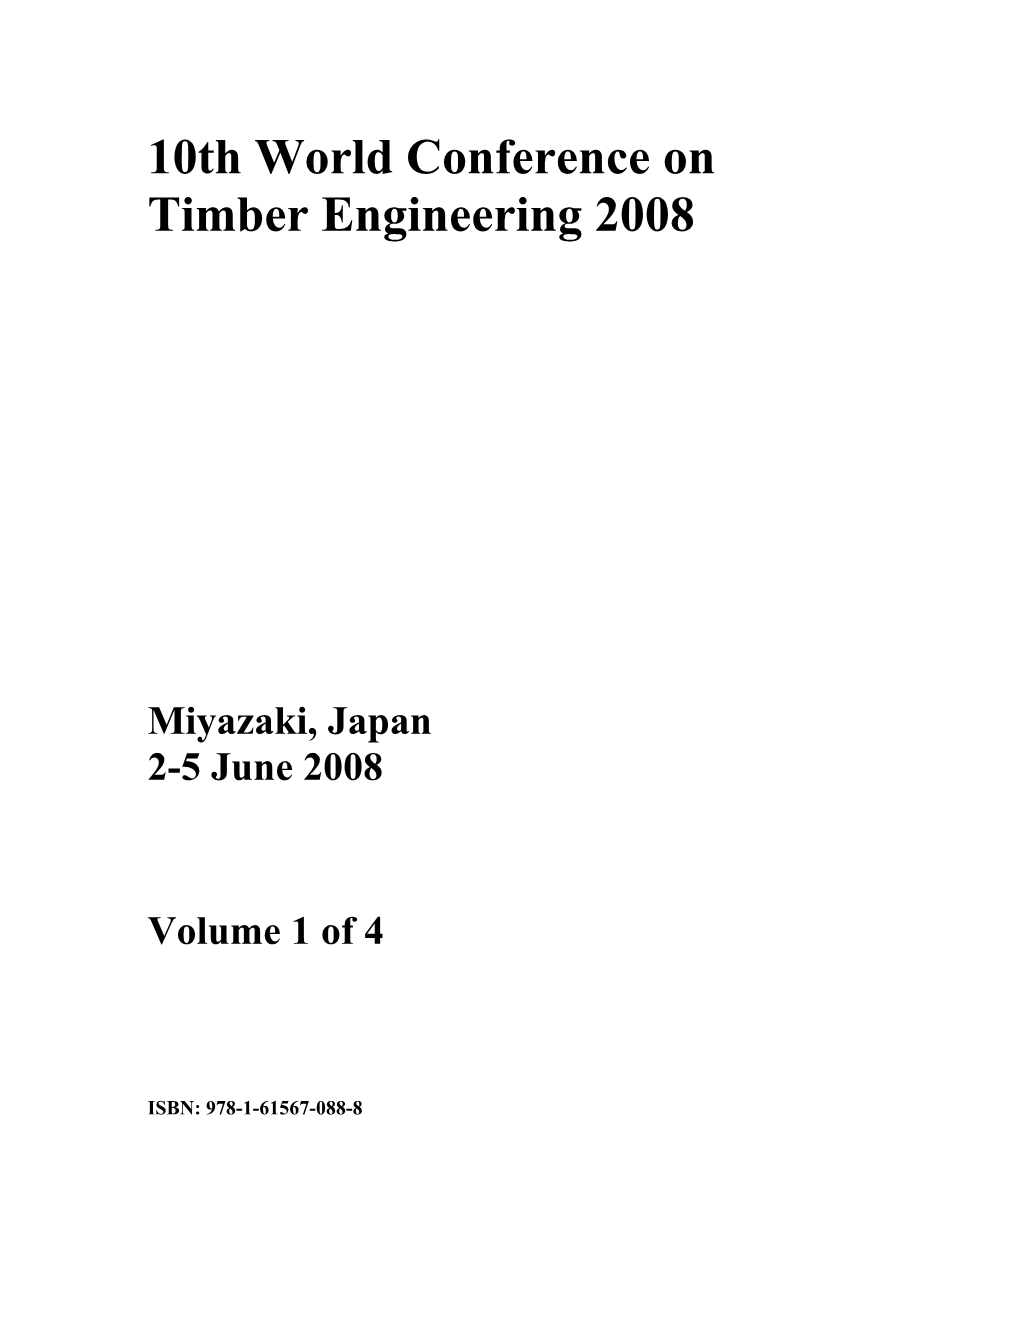 10Th World Conference on Timber Engineering 2008